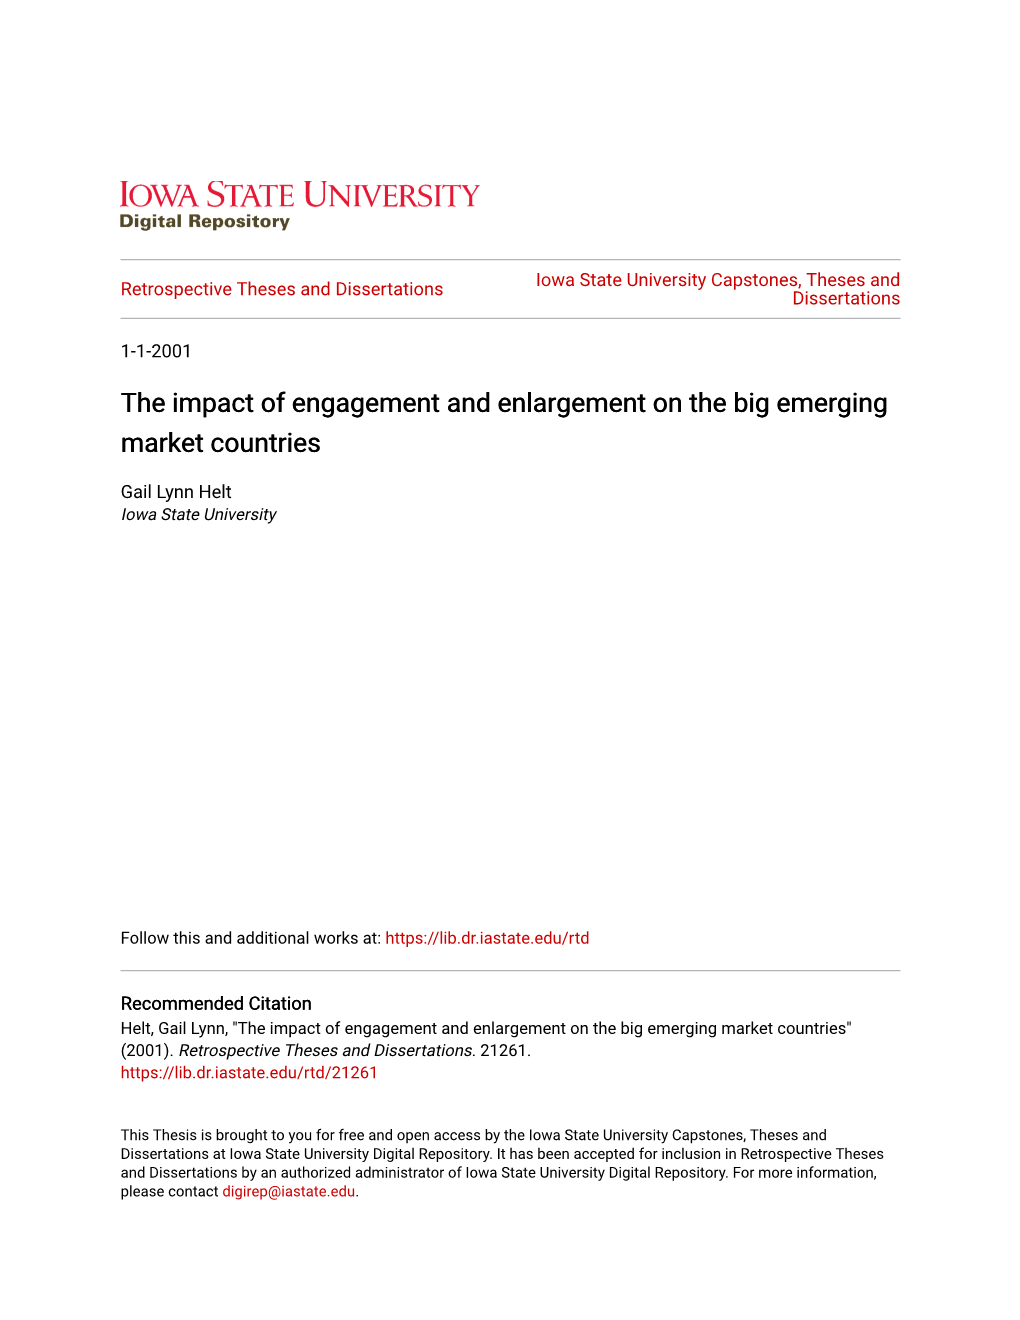 The Impact of Engagement and Enlargement on the Big Emerging Market Countries